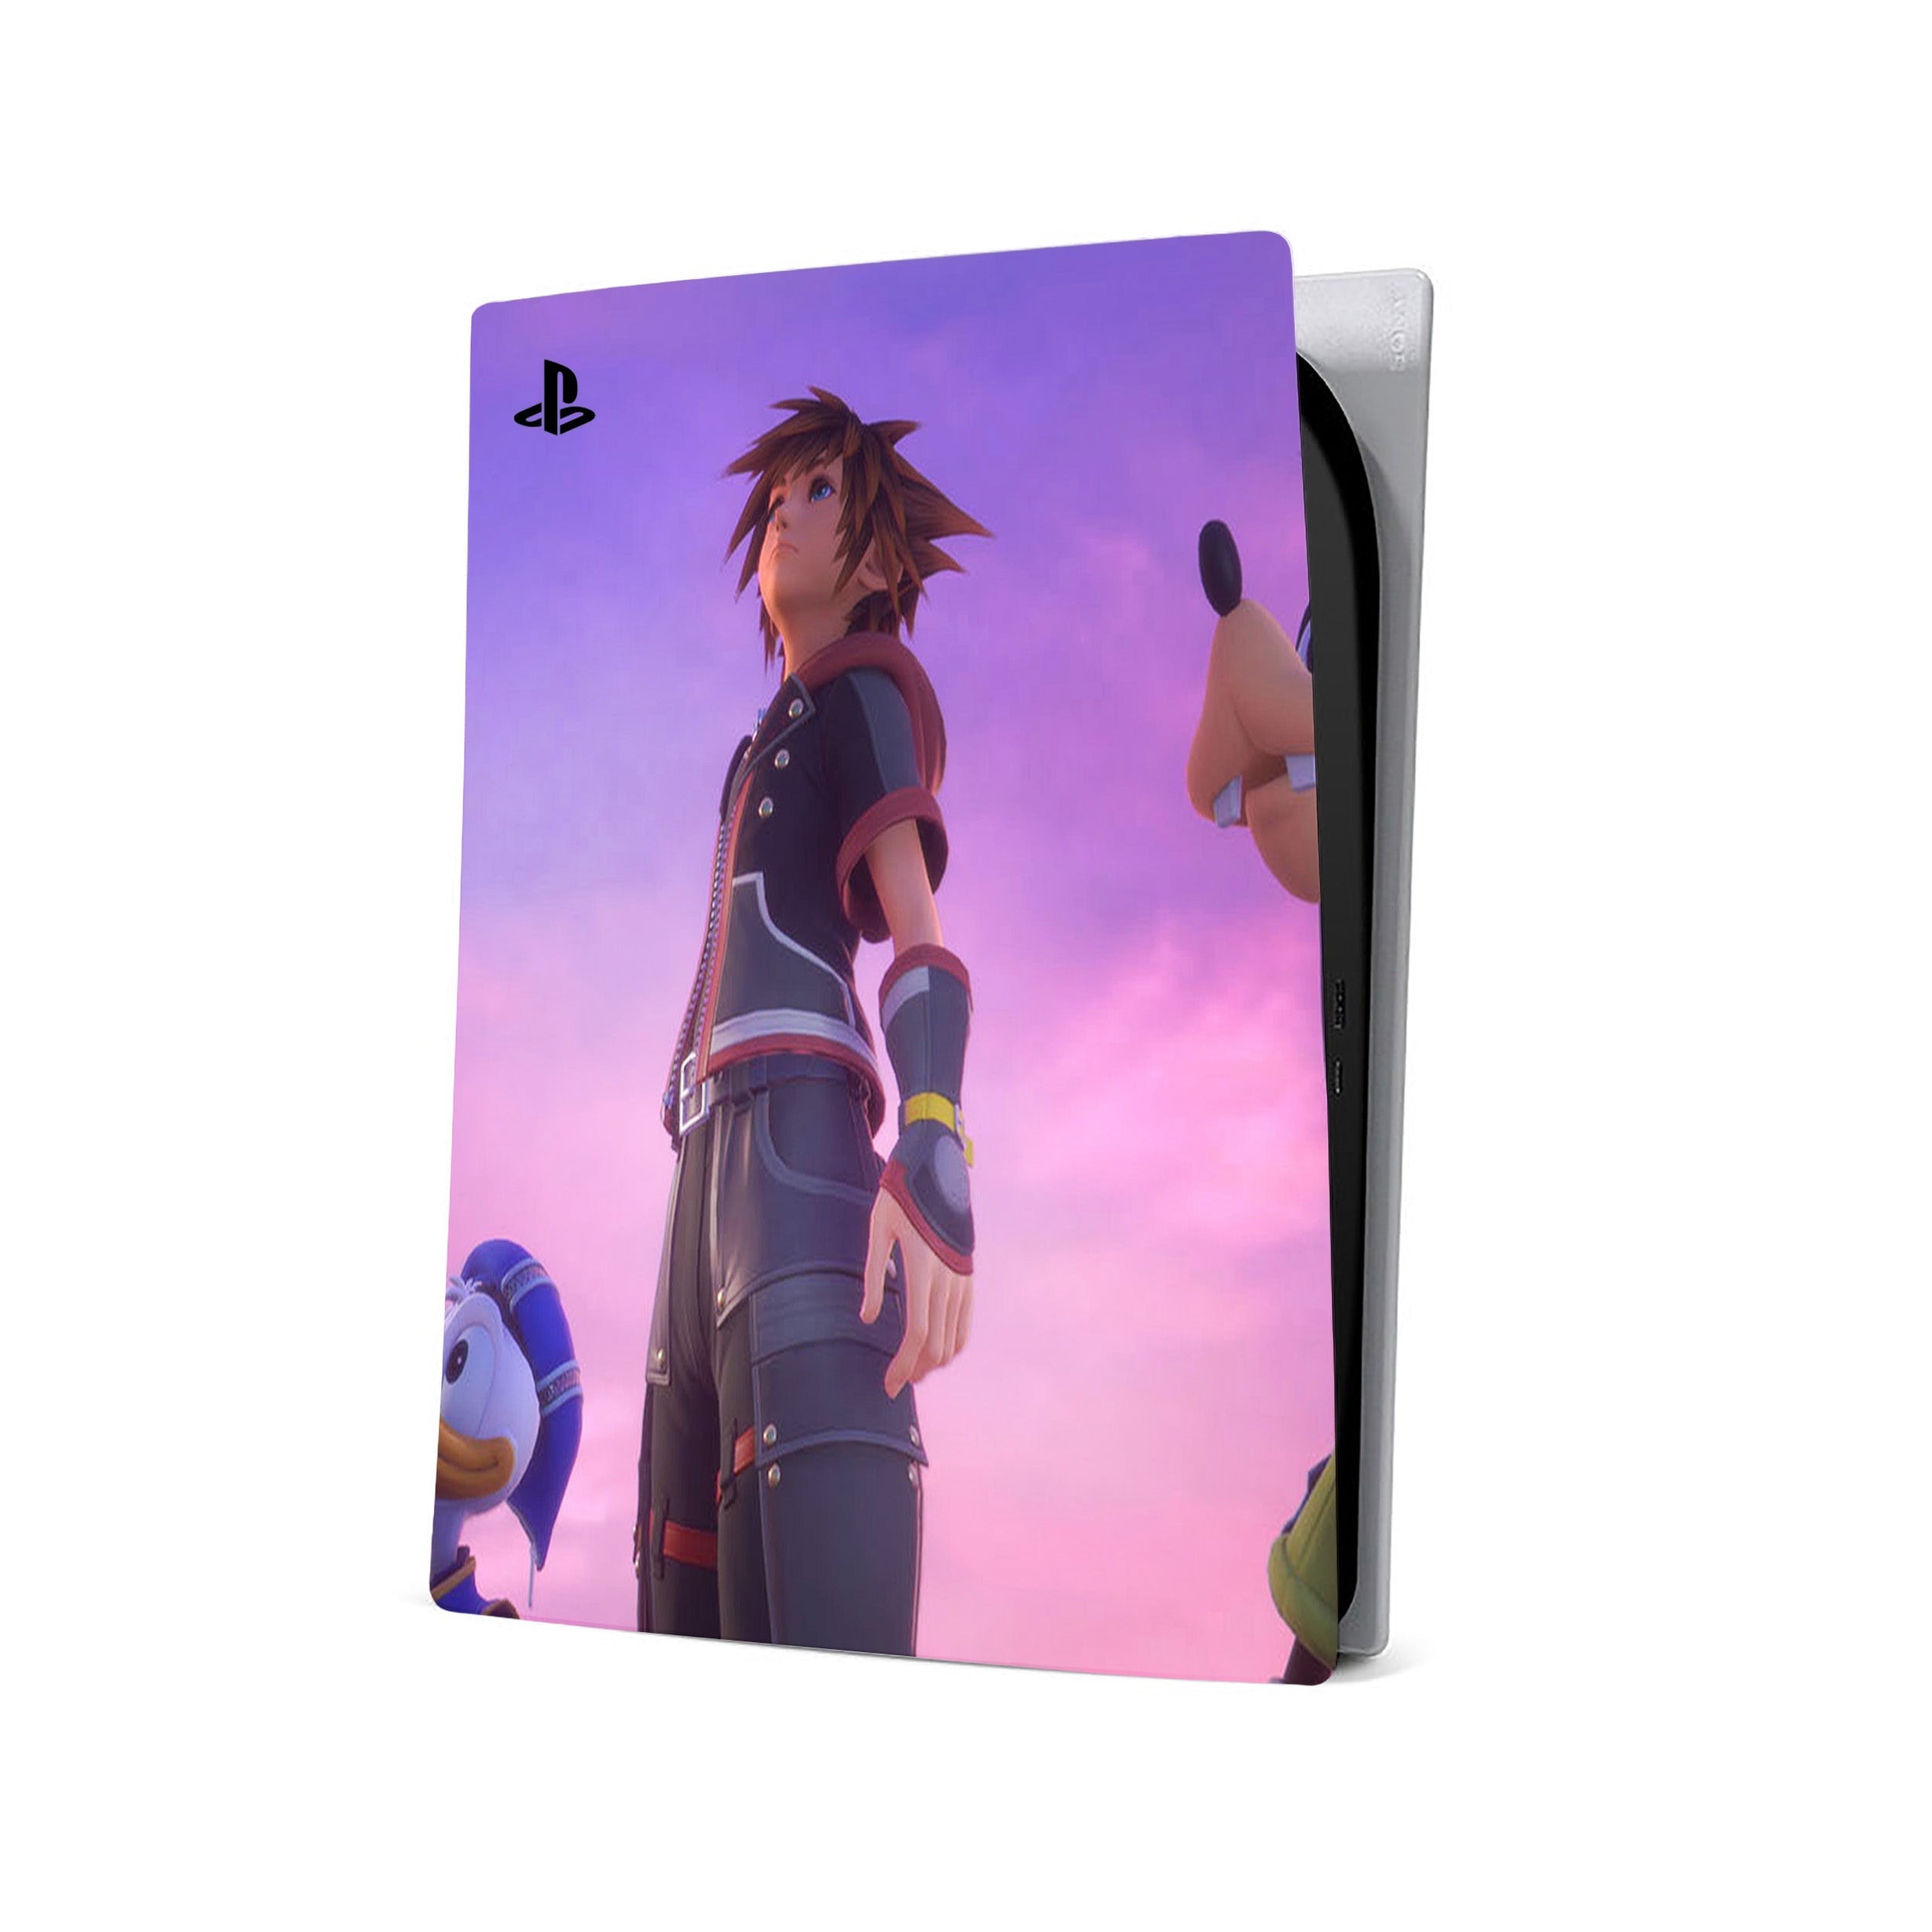 A video game skin featuring a Kingdom Hearts design for the PS5.